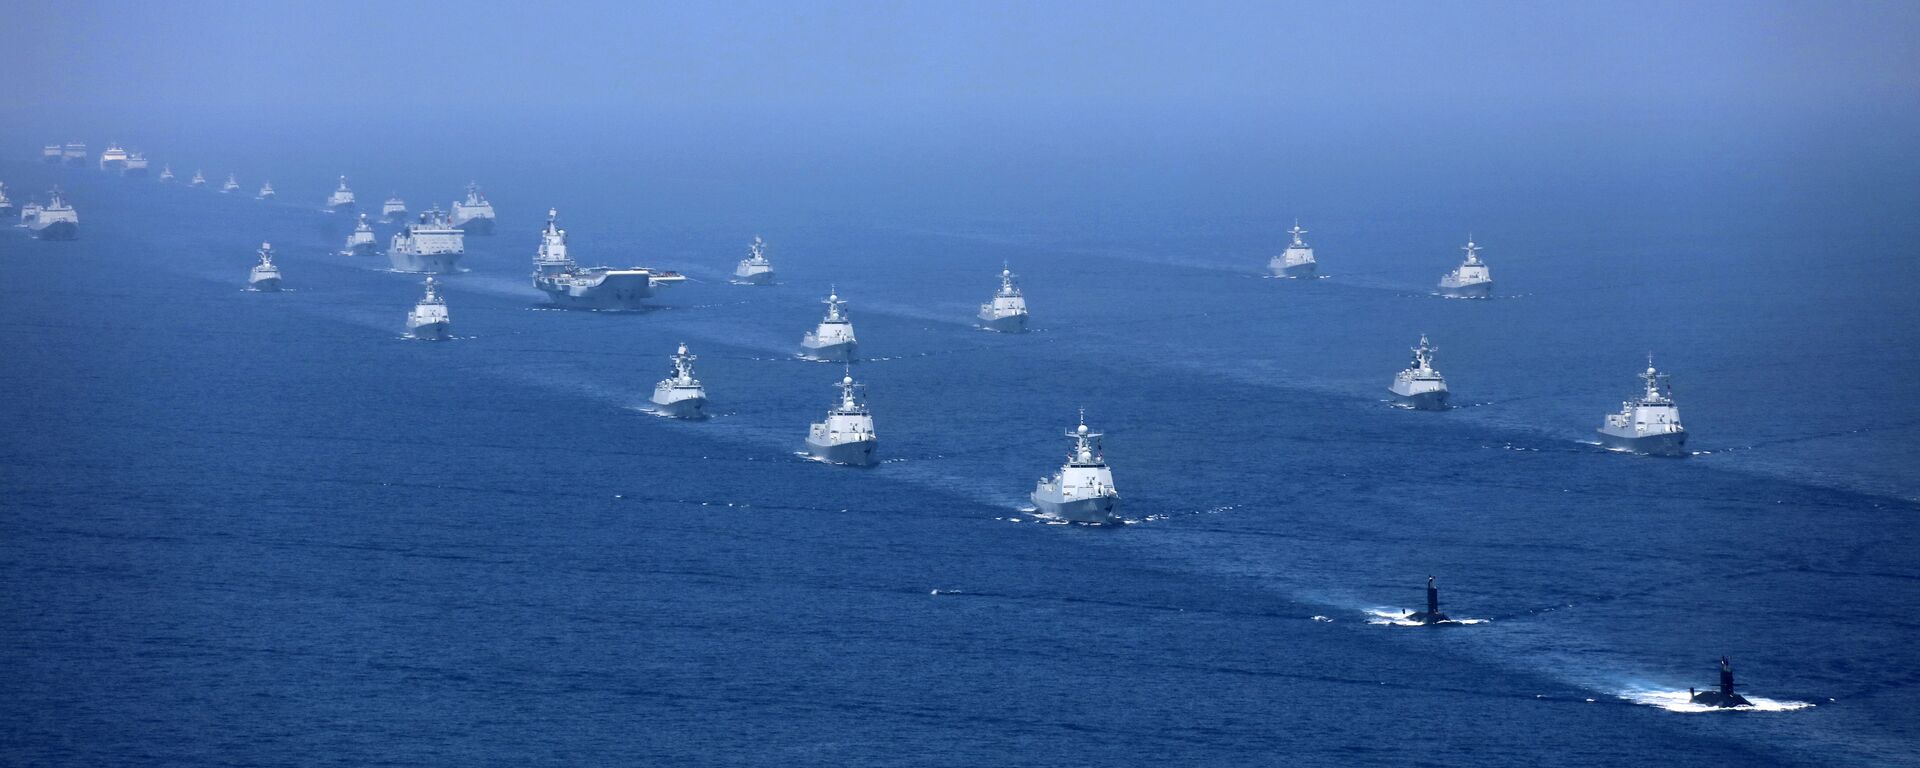 In this April 12, 2018 photo released by Xinhua News Agency, the Liaoning aircraft carrier is accompanied by navy frigates and submarines conducting an exercises in the South China Sea - Sputnik International, 1920, 02.06.2022